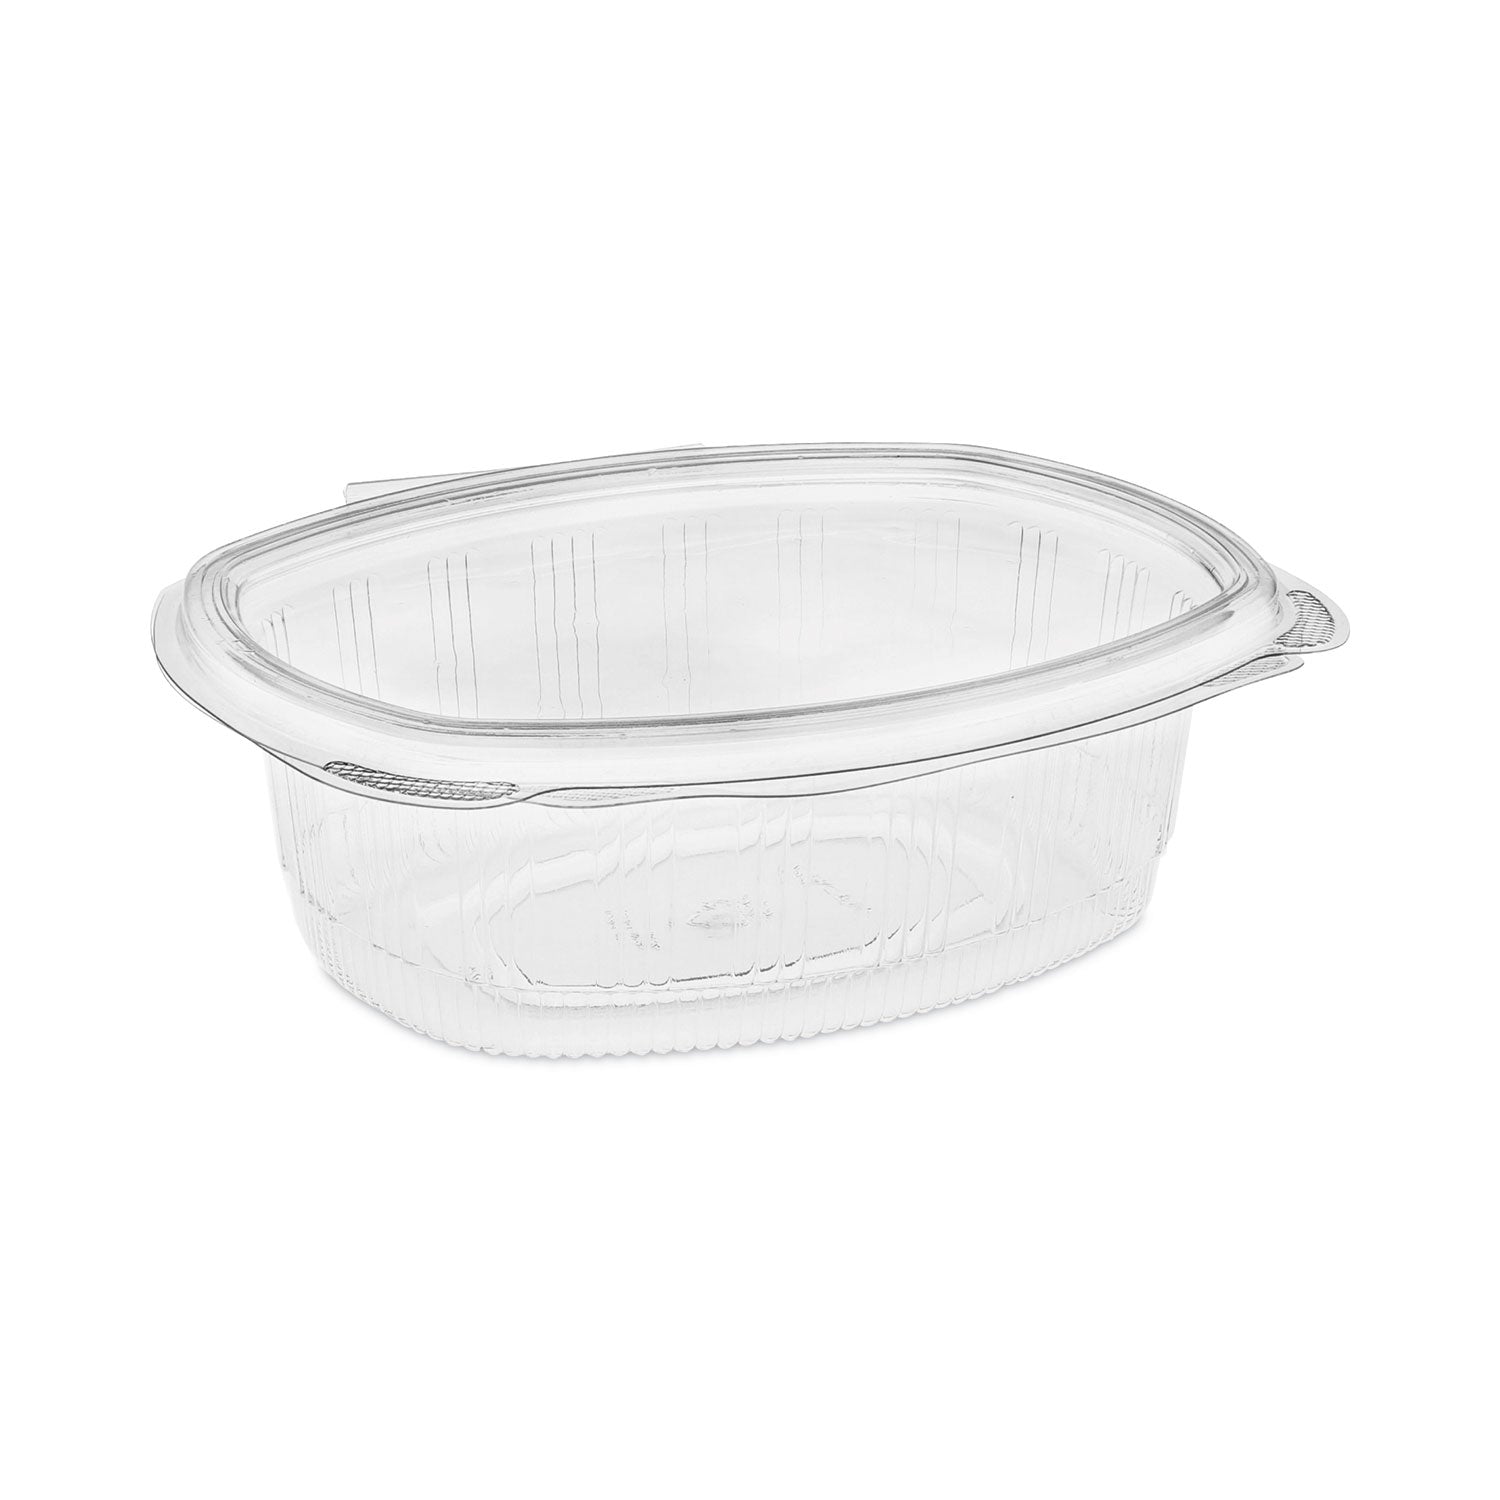 earthchoice-recycled-pet-hinged-container-24-oz-738-x-588-x-238-clear-plastic-280-carton_pctyca910240000 - 1